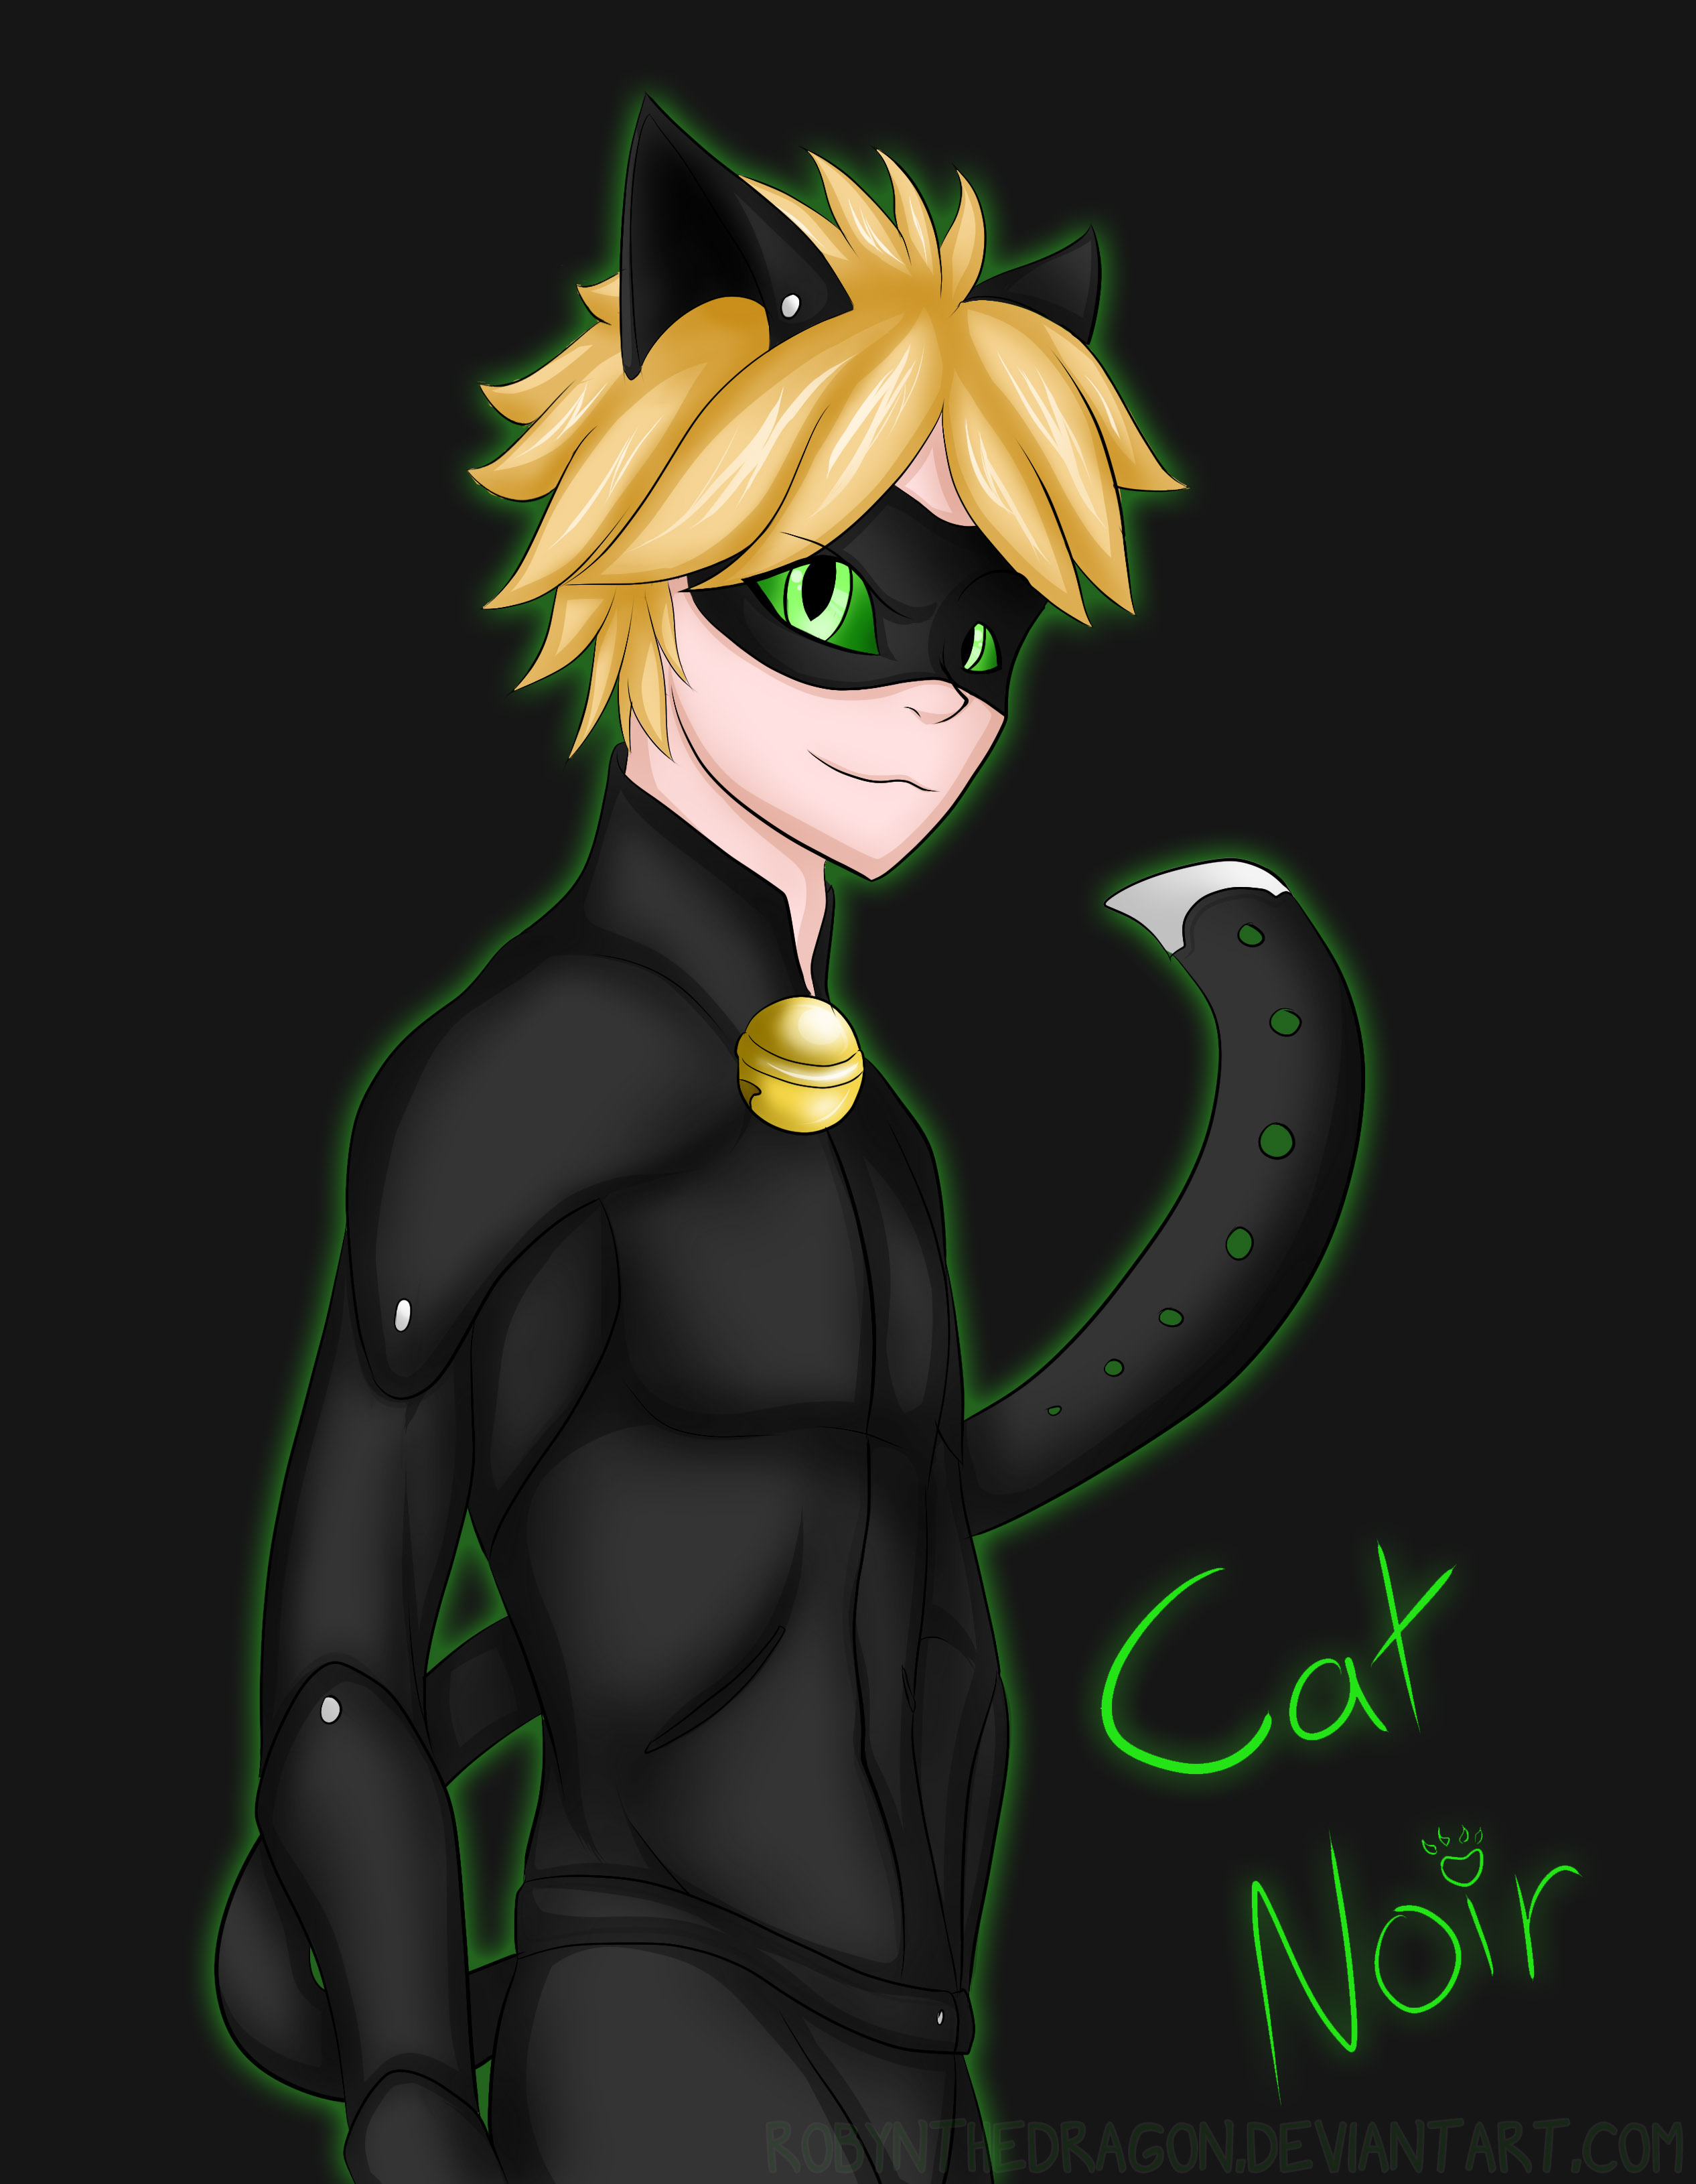 Cat Noir by RobynTheDragon on DeviantArt